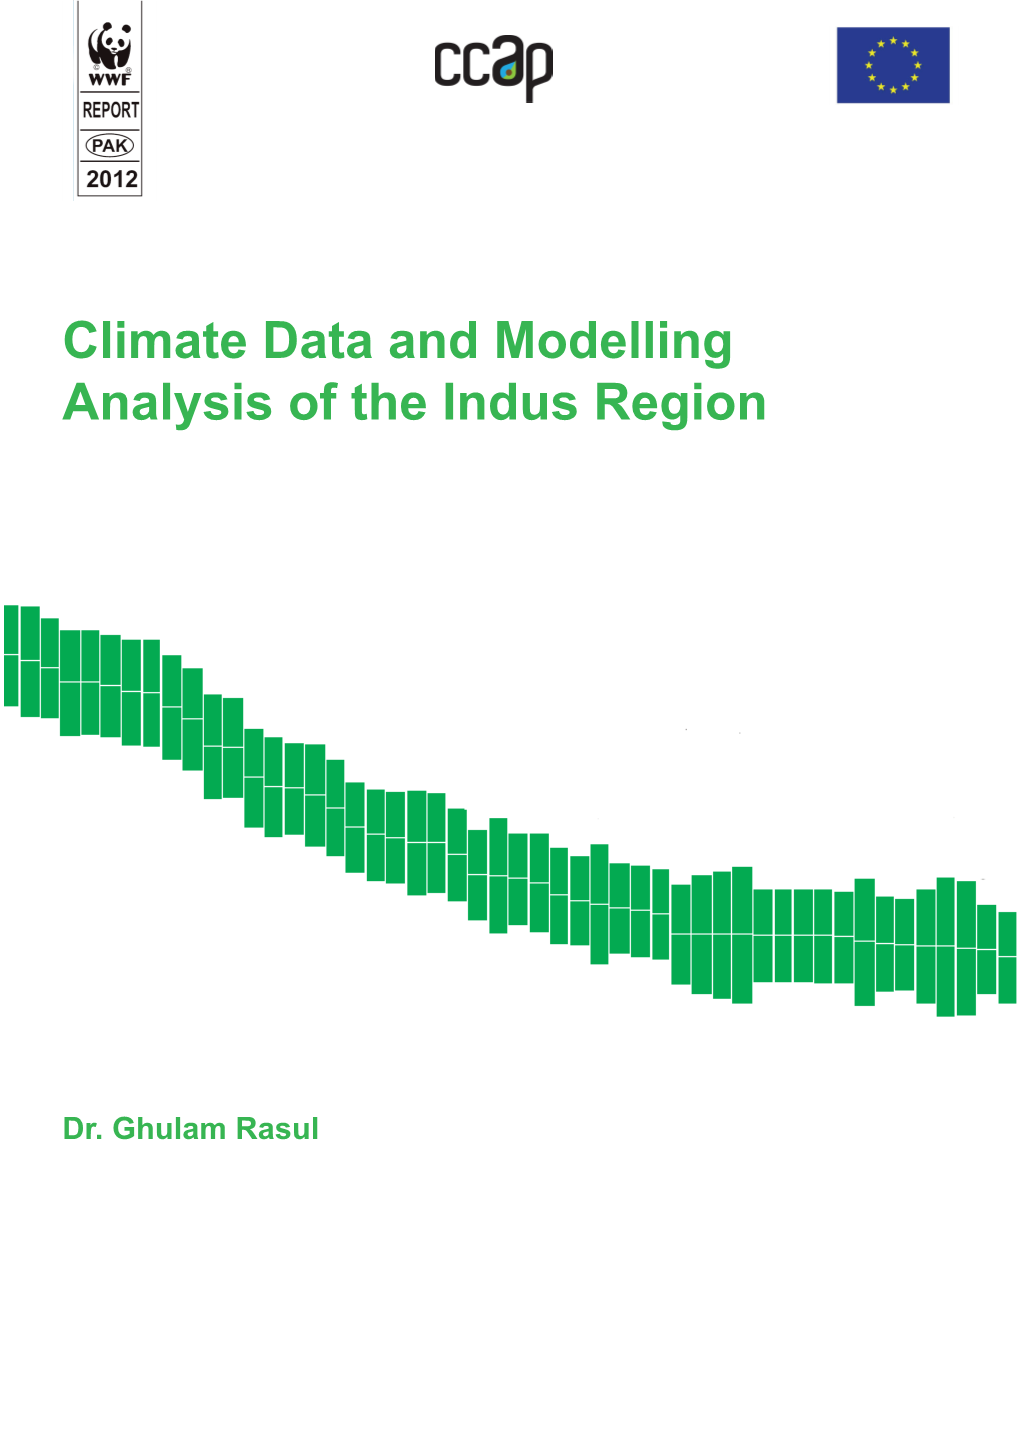 Climate Data and Modelling Analysis of the Indus Region